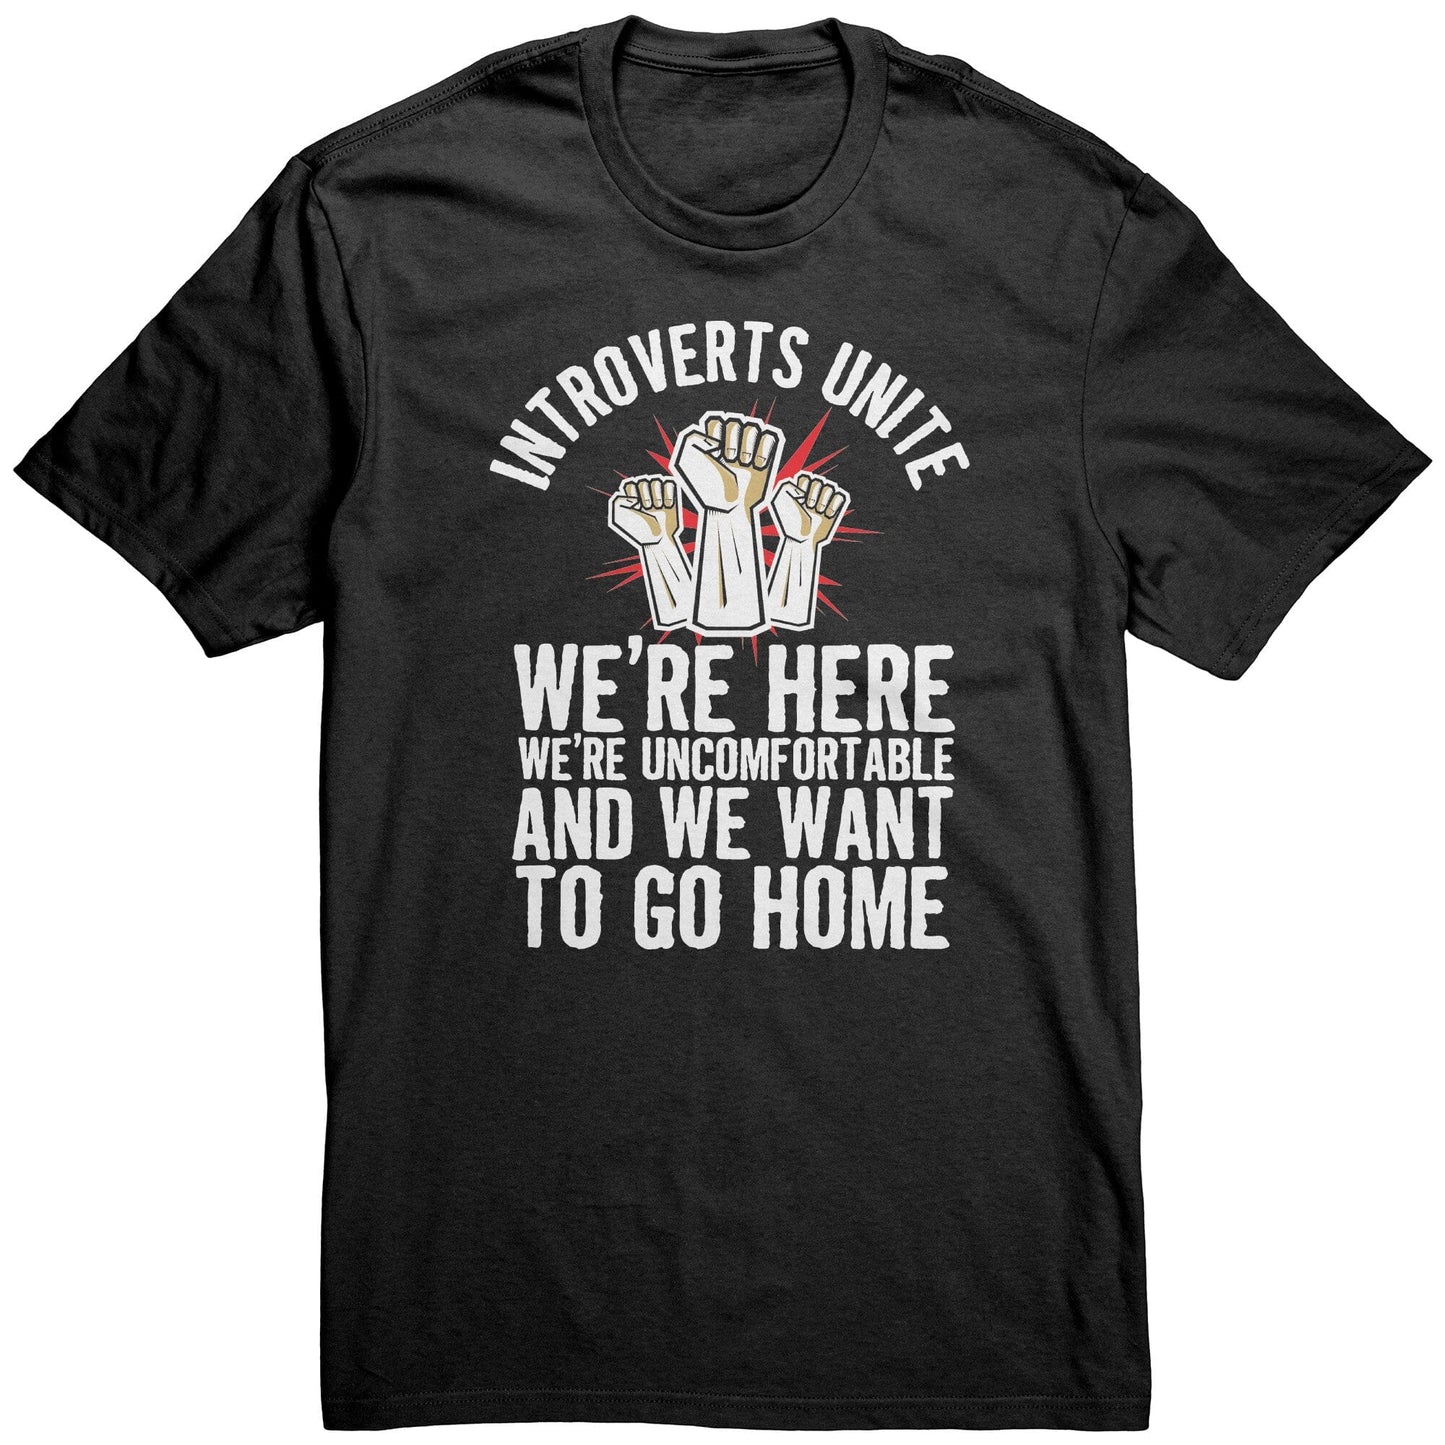 Funny "Introverts Unite - We're Here, We're Uncomfortable, and We Want To Go Home" Shirt Apparel Black S 